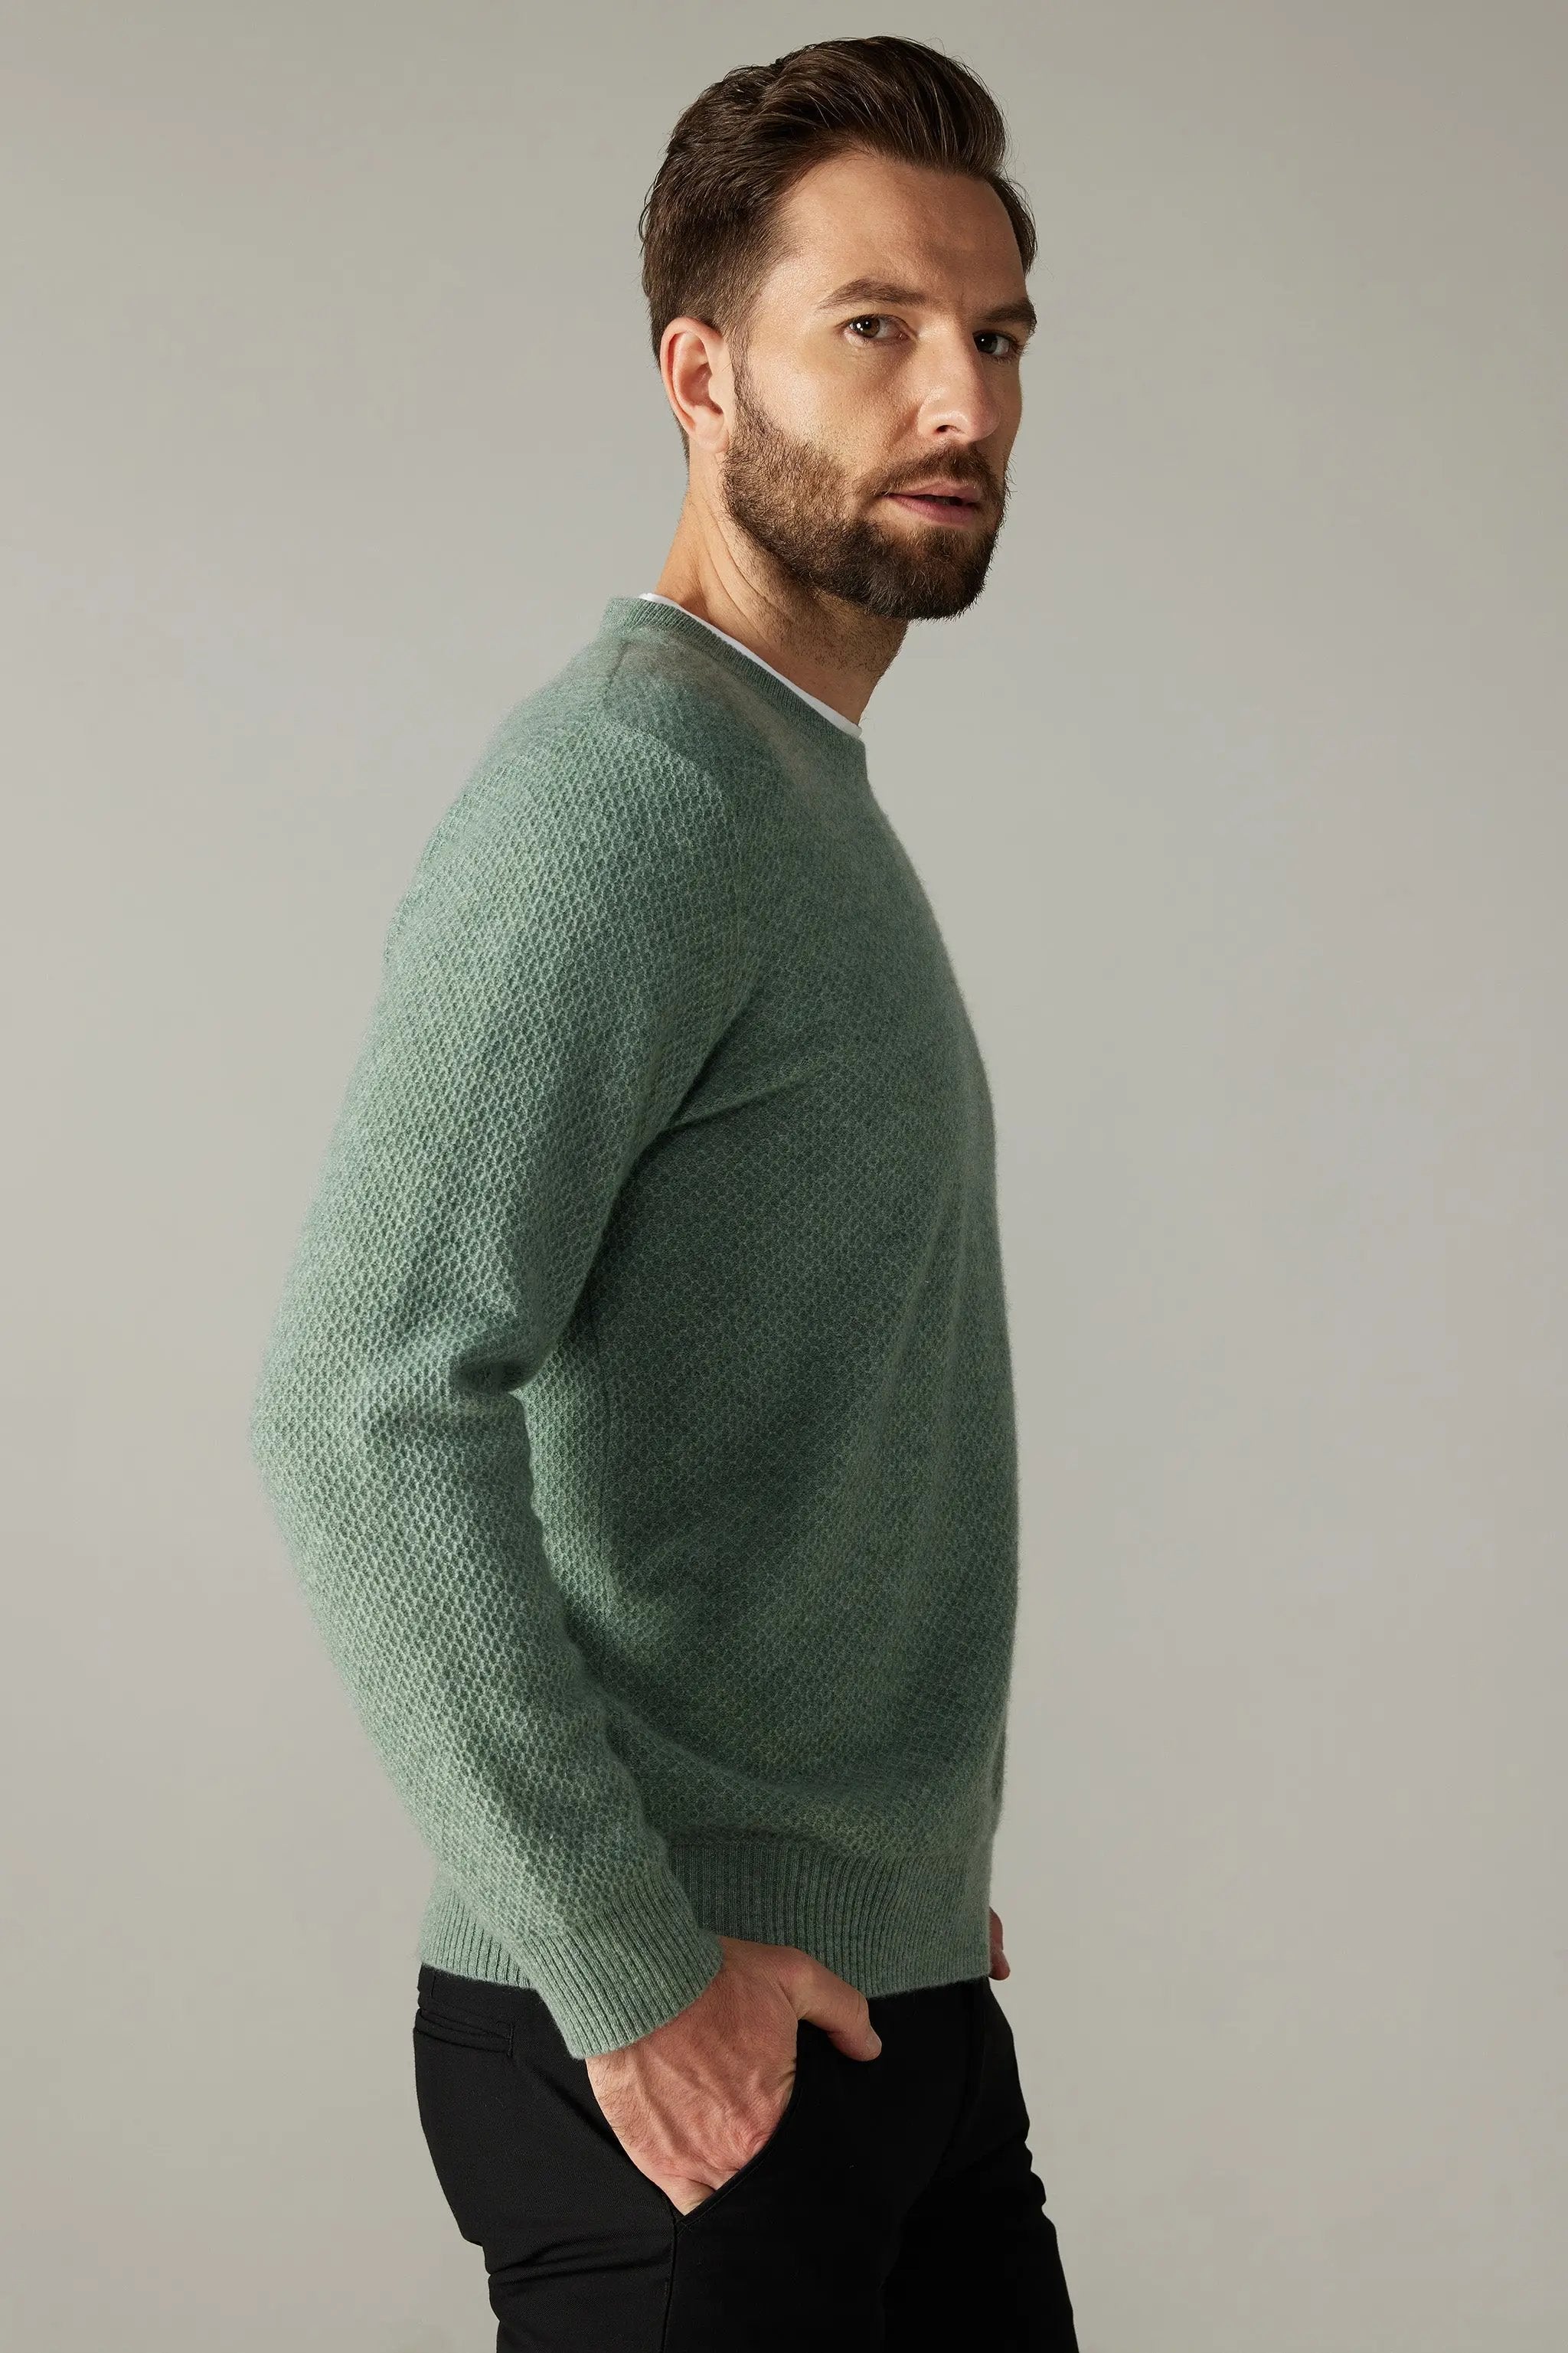 a man wearing a green sweater and black pants